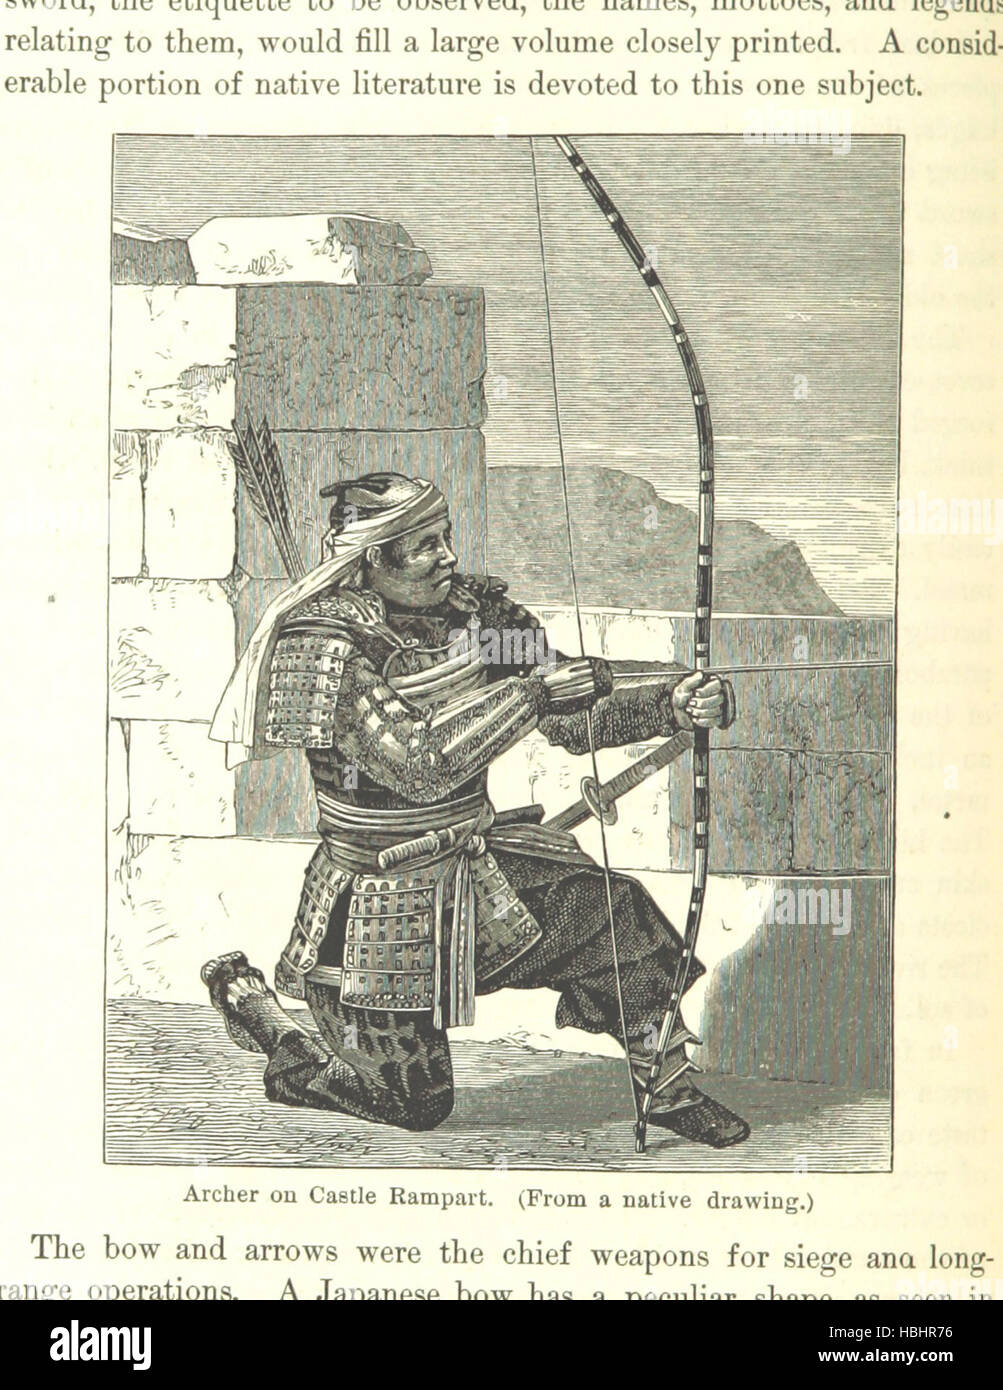 The Mikado's Empire. Book I. History of Japan, from 660 B.C to 1872, A.D. Book II. Personal experiences, observations, and studies in Japan, 1870-1874 Image taken from page 234 of 'The Mikado's Empire Book Stock Photo